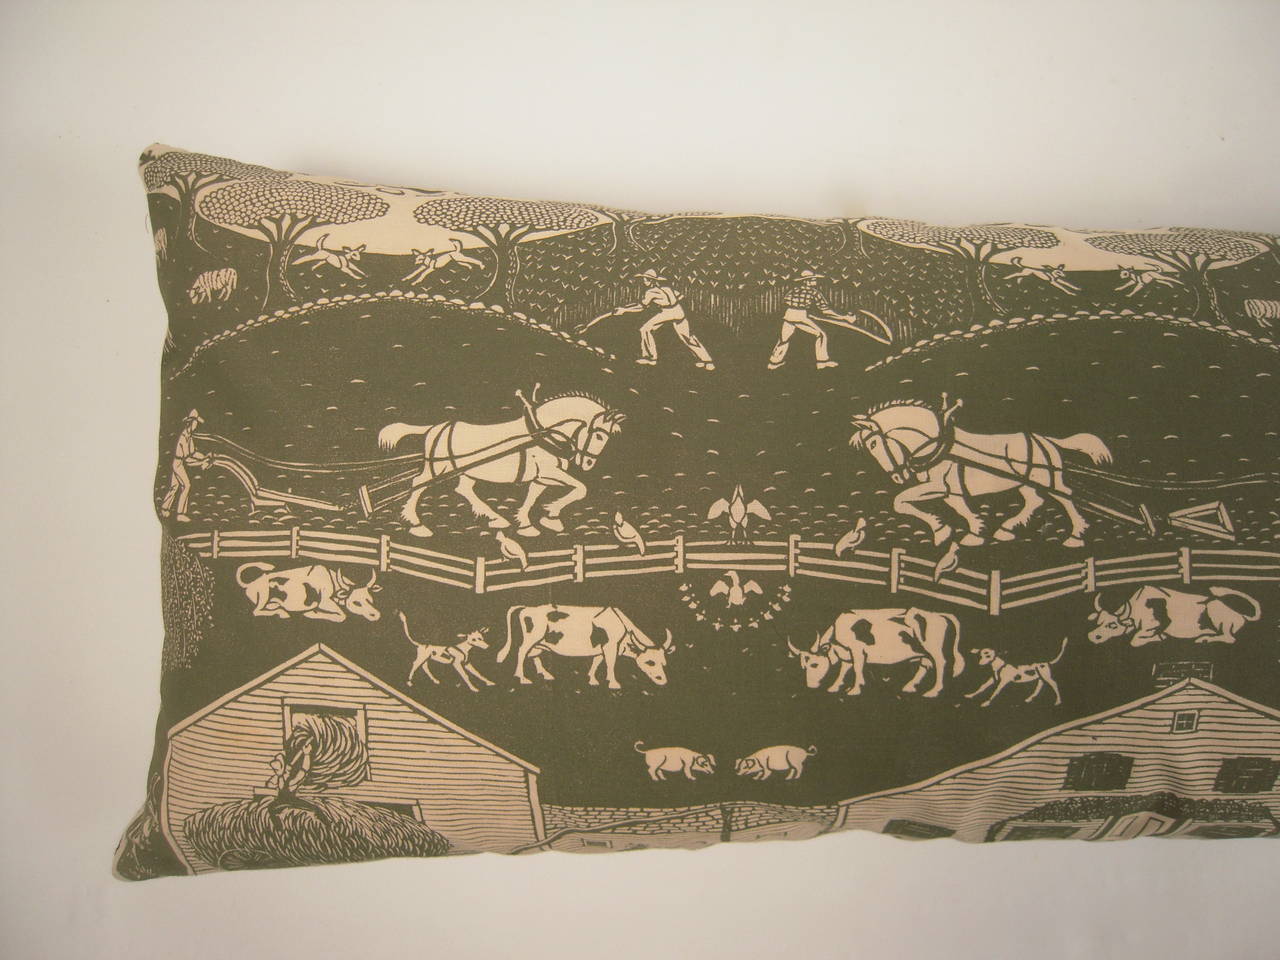 A rare Folly Cove Designers hand block printed rectangular pillow in the New England Farm pattern, designed by Eino Natti, circa 1954, in olive green on cream cotton, newly down filled and backed with olive green linen. In perfect, mint